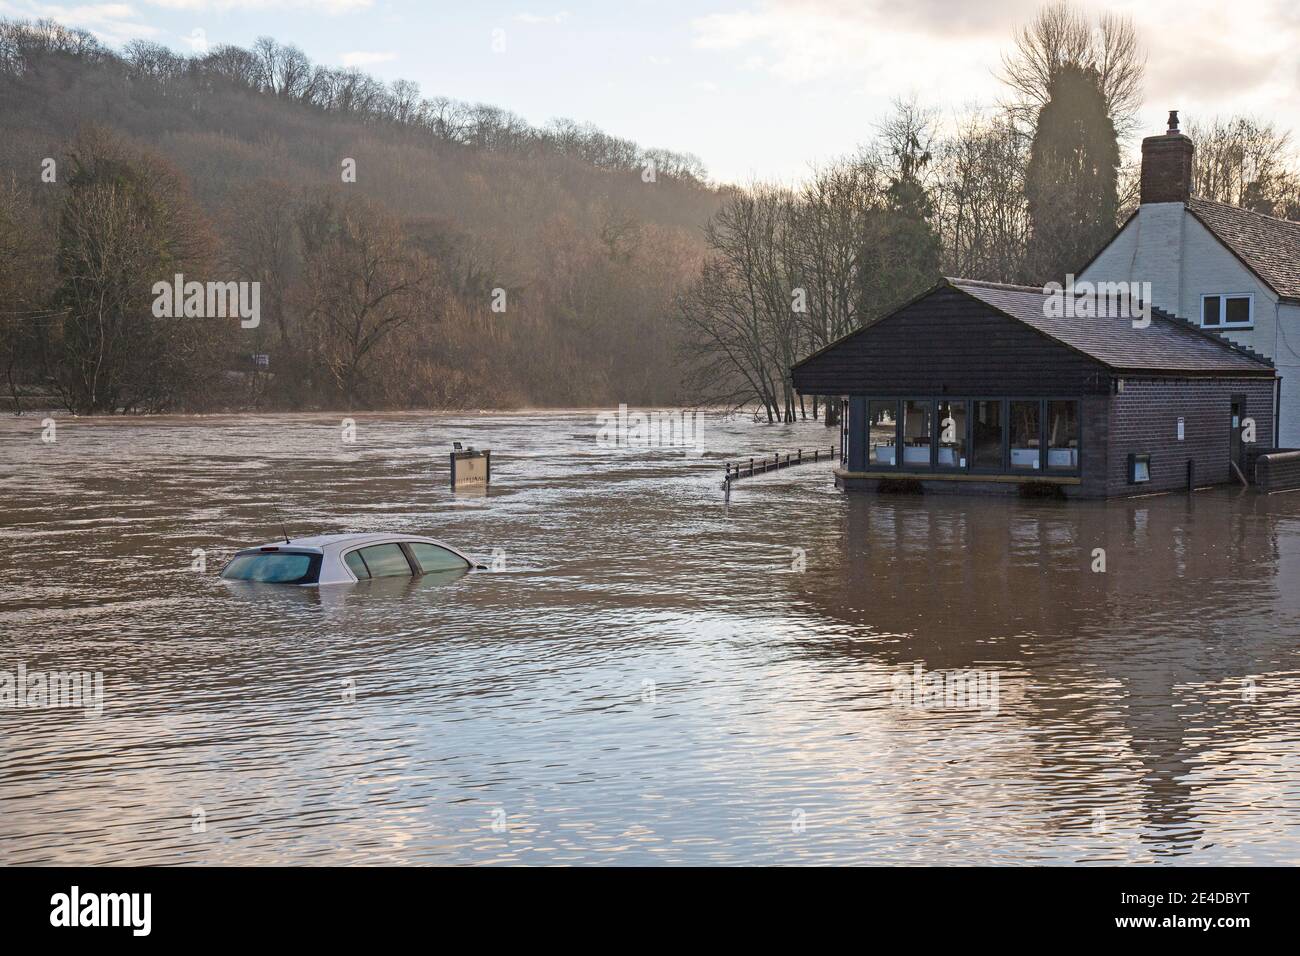 Shropshire, UK. 23rd Jan, 2021. Levels of the River Severn in Shropshire continued to rise overnight, causing sever floods in certain areas. The village of Jackfield in the Ironbridge Gorge World Heritage Site has been particularly badly hit, with homes and businesses badly flooded. Levels are very close to the records floods of February 2020. A car, left overnight in a riverside car park, is almost totally sumberged by the flood waters. Credit: Rob Carter/Alamy Live News Stock Photo